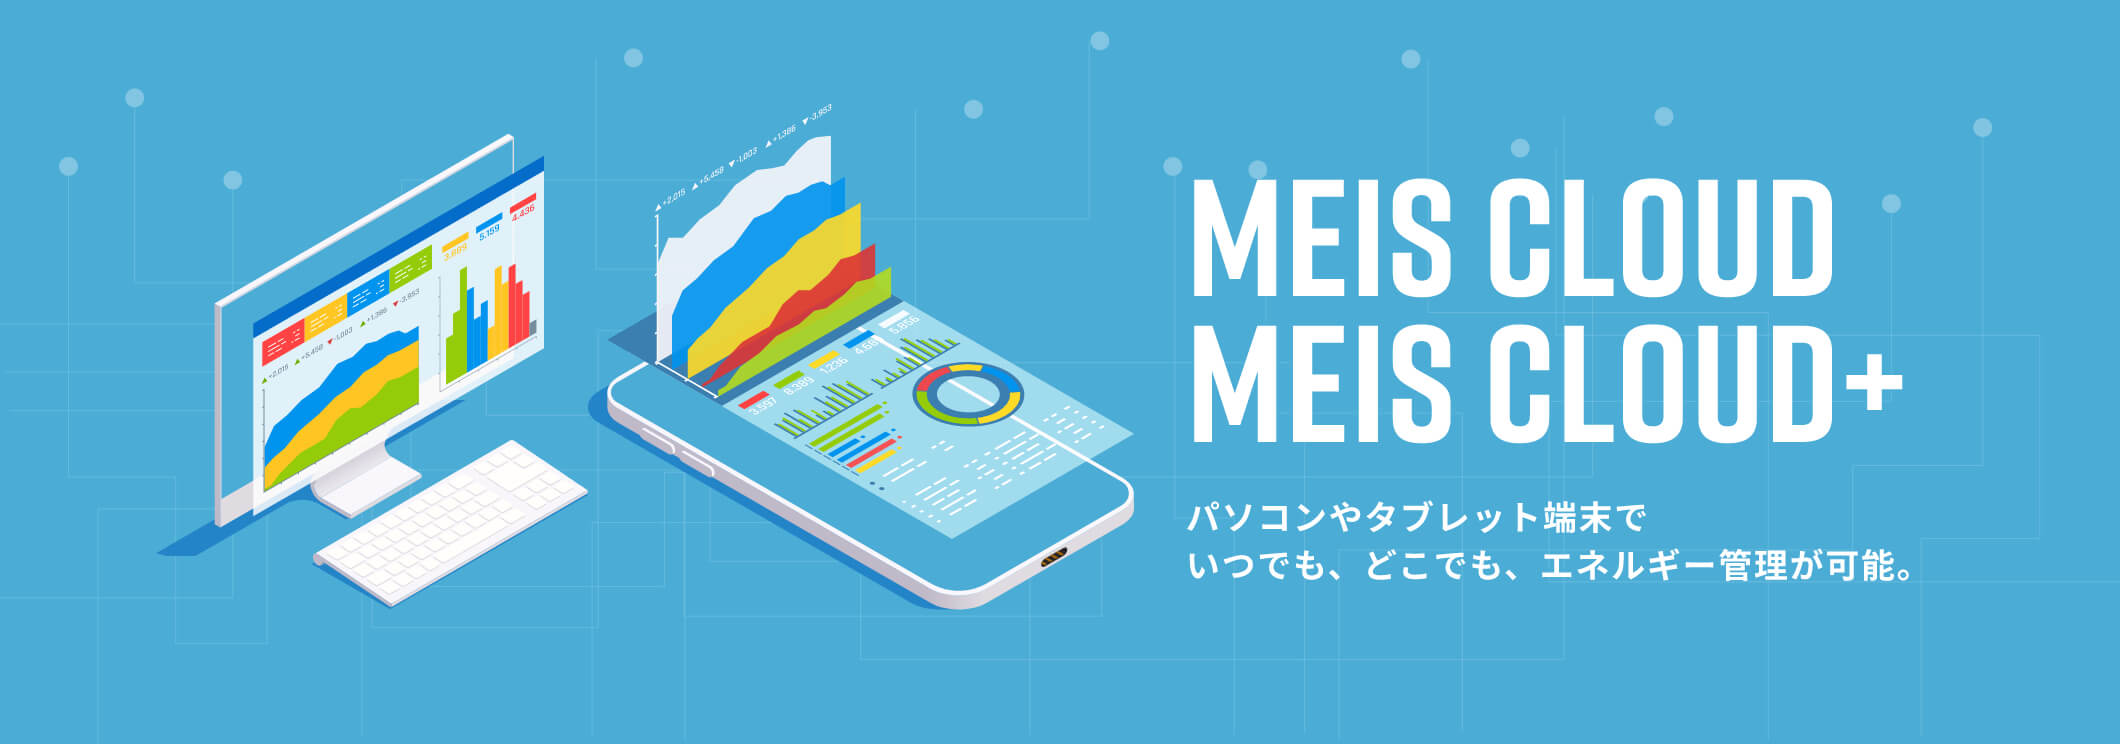 MEIS CLOUD／MEIS CLOUD+　パソコンやタブレット端末でいつでも、どこでもエネルギー管理が可能。